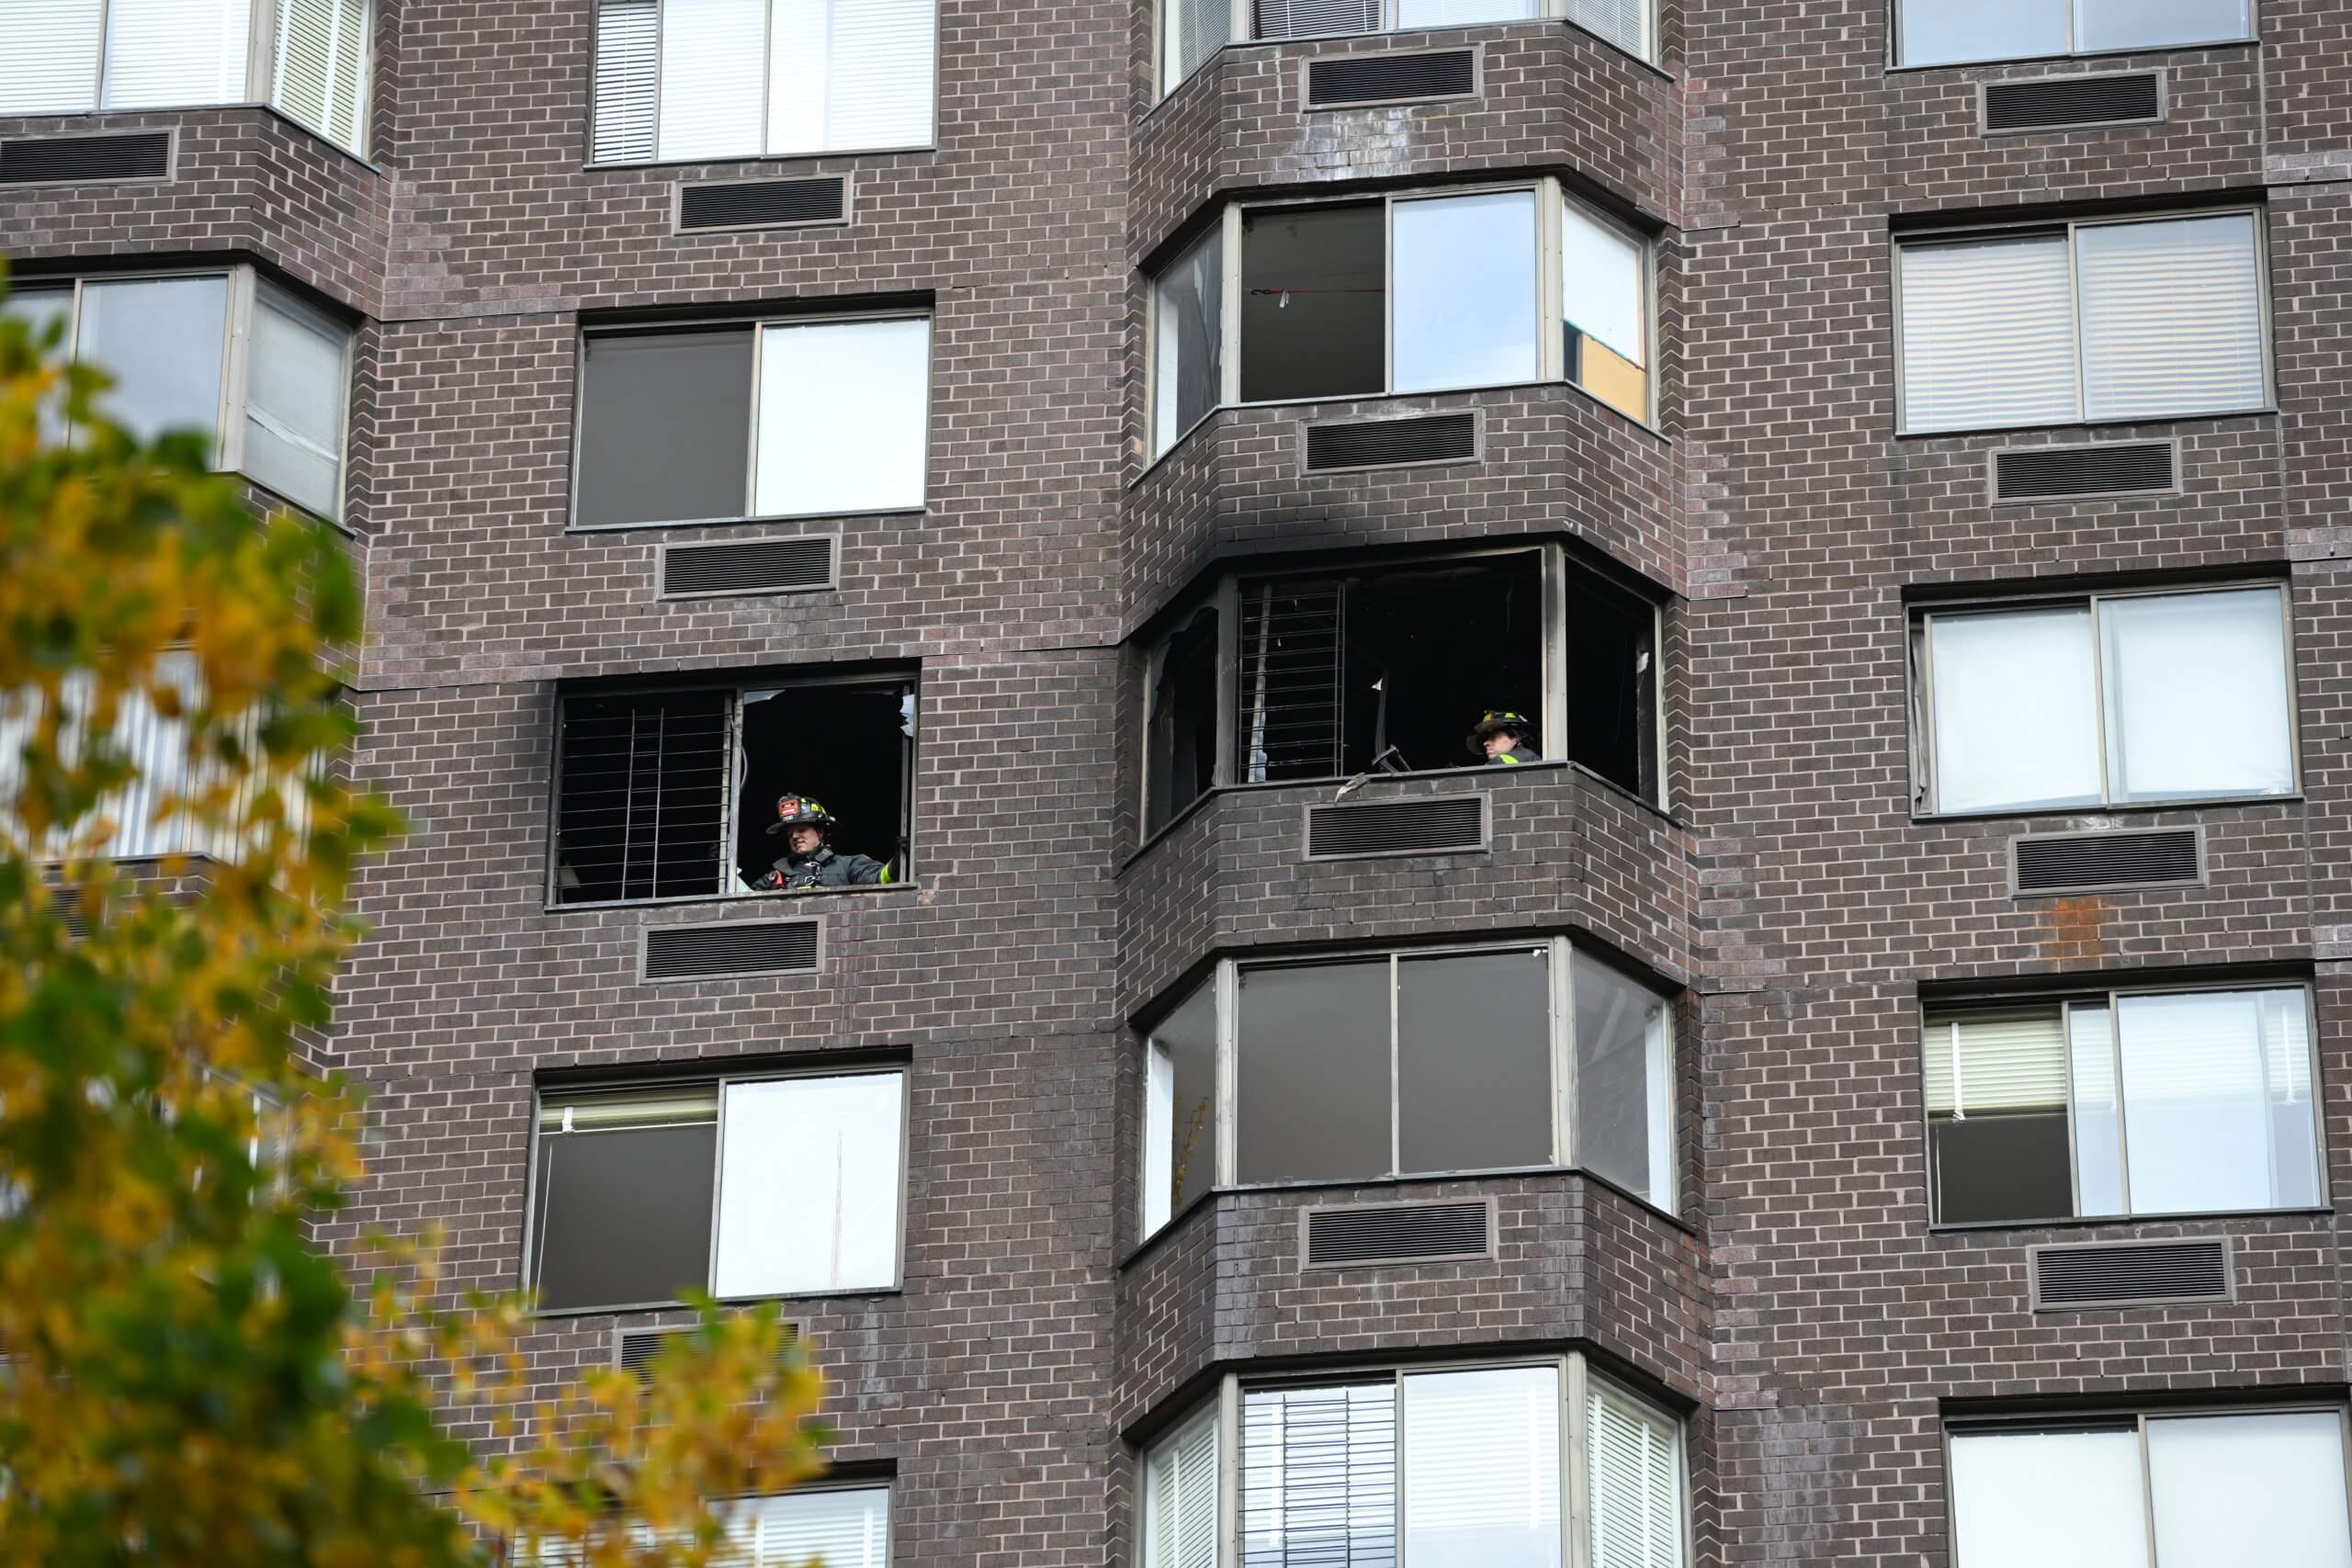 Firefighter inside East Midtown high rise that caught fire